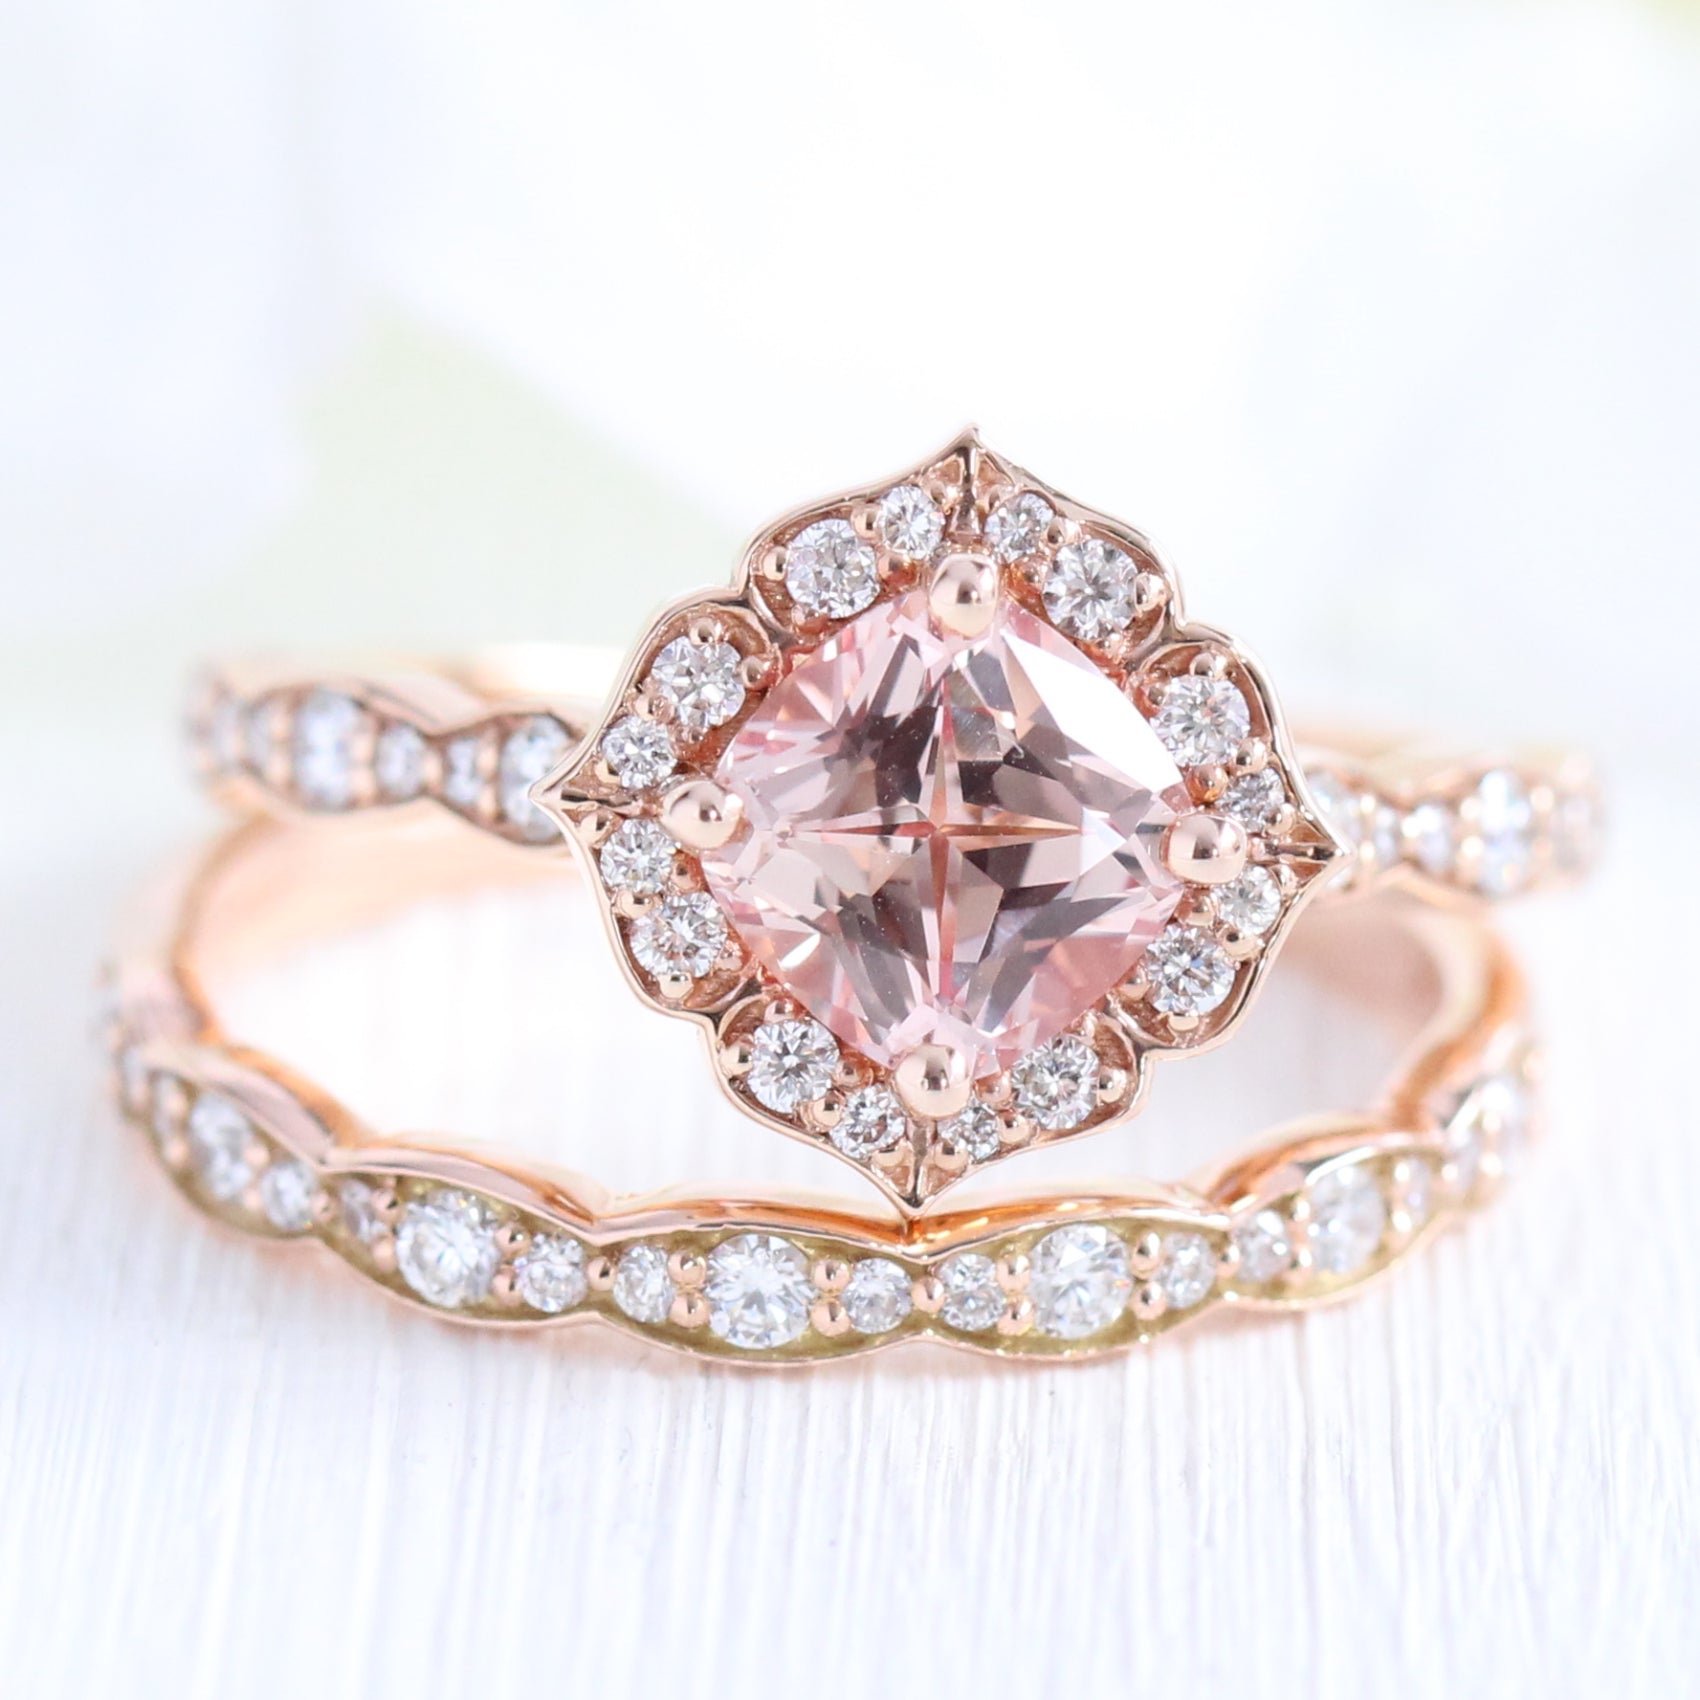 Vintage halo diamond peach sapphire engagement ring stack rose gold by la more design jewelry